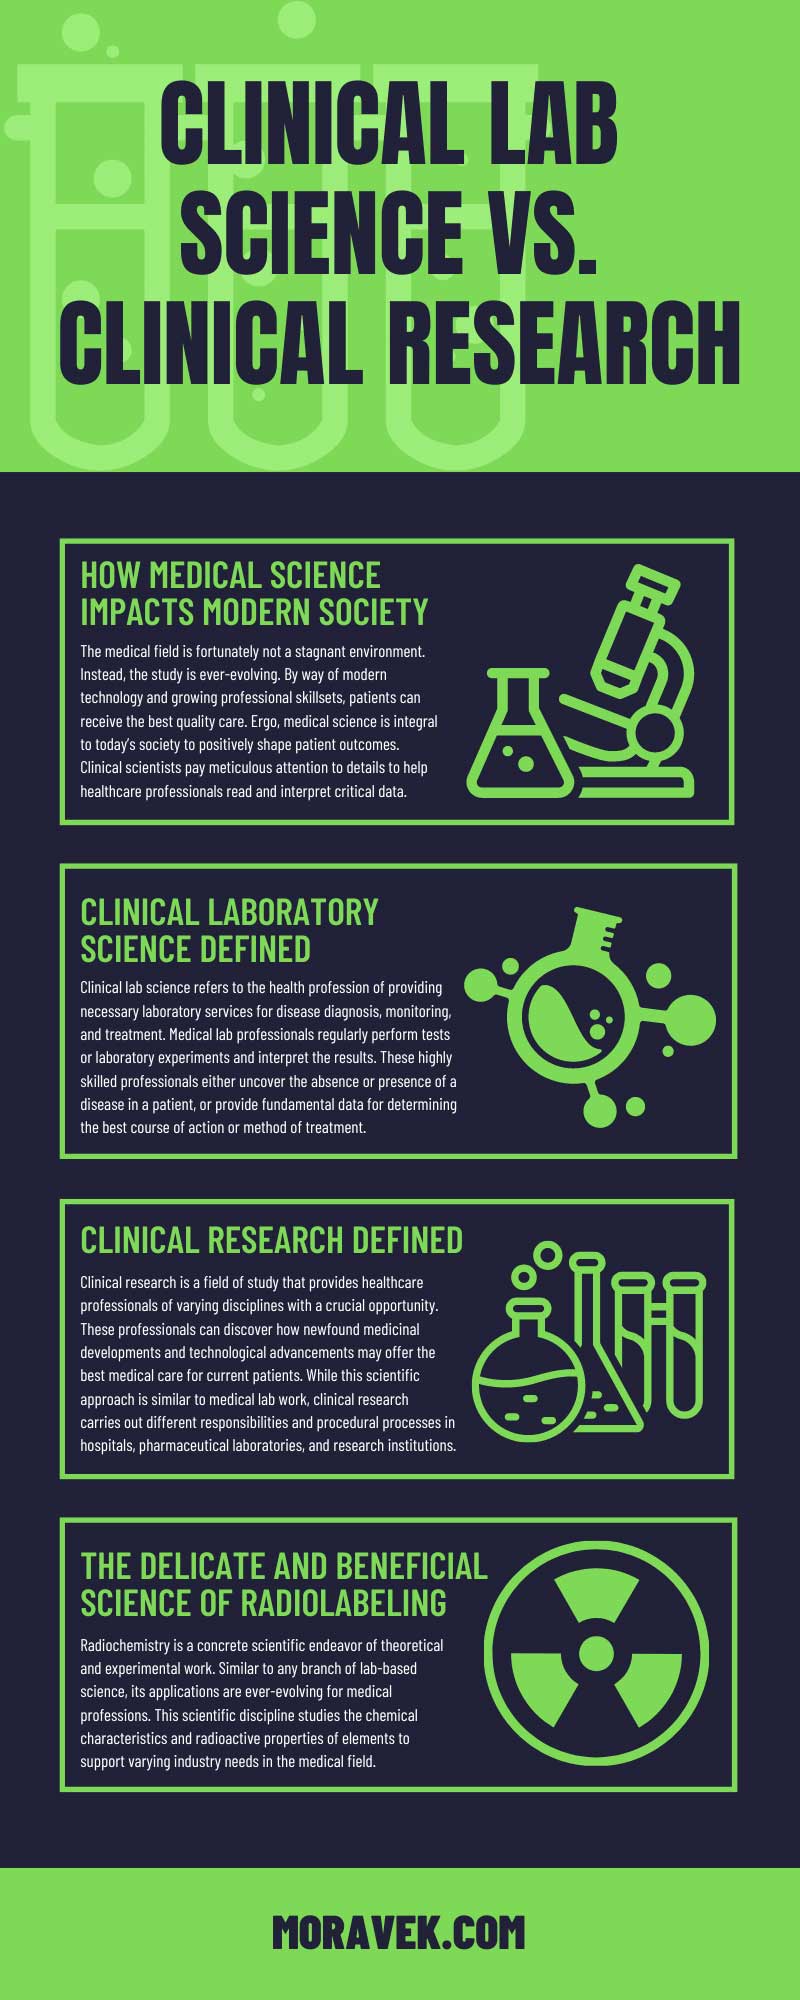 Clinical Lab Science vs. Clinical Research